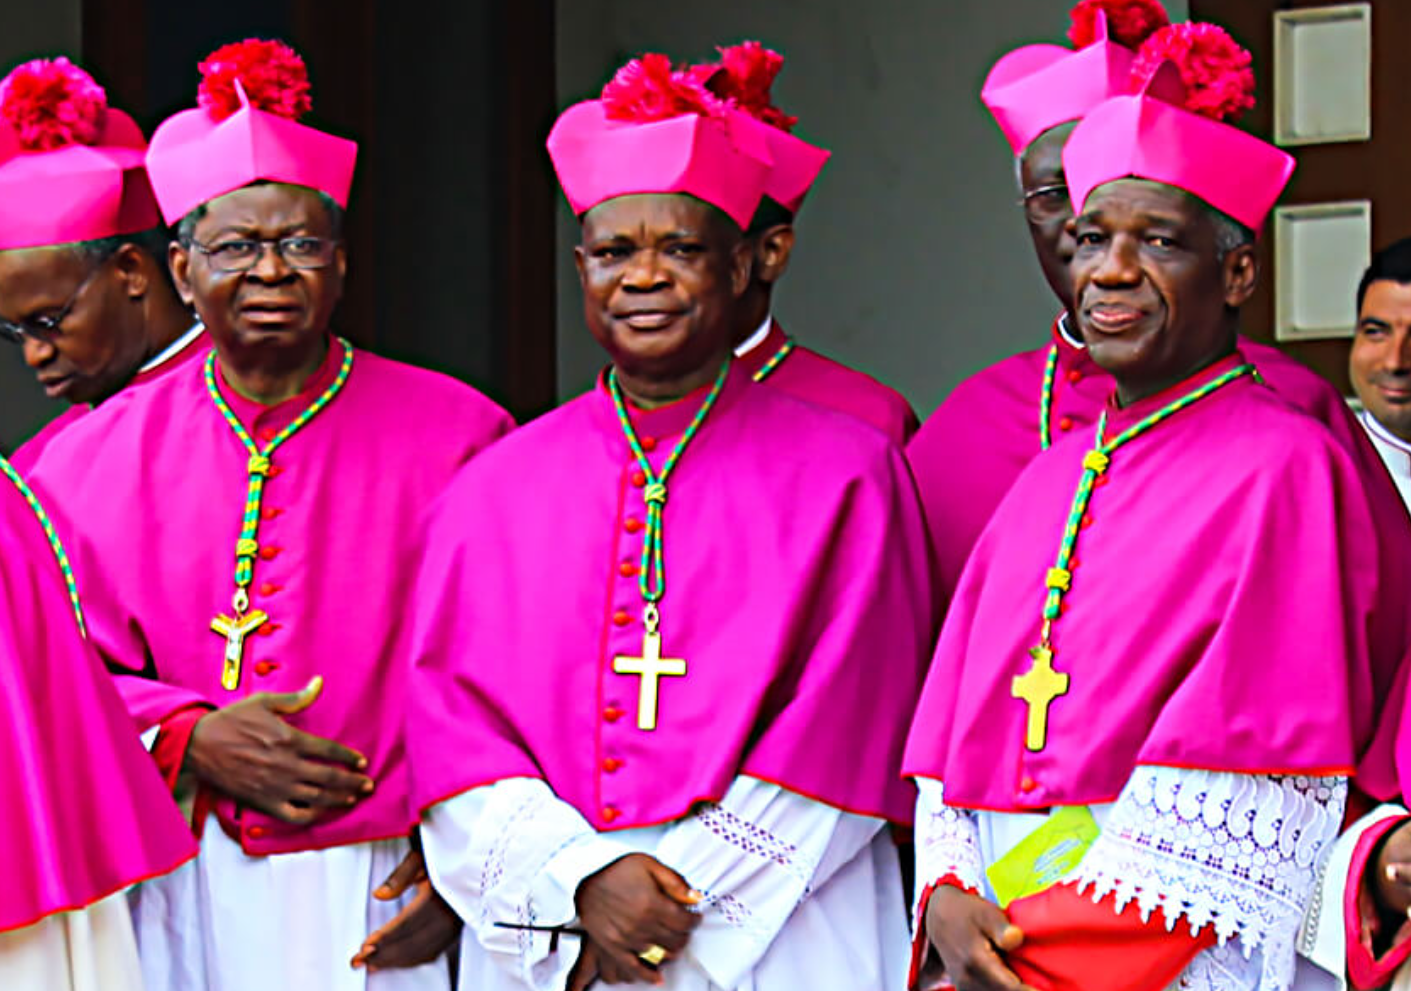 We cannot bless same-sex unions – Ghana Catholic Bishops